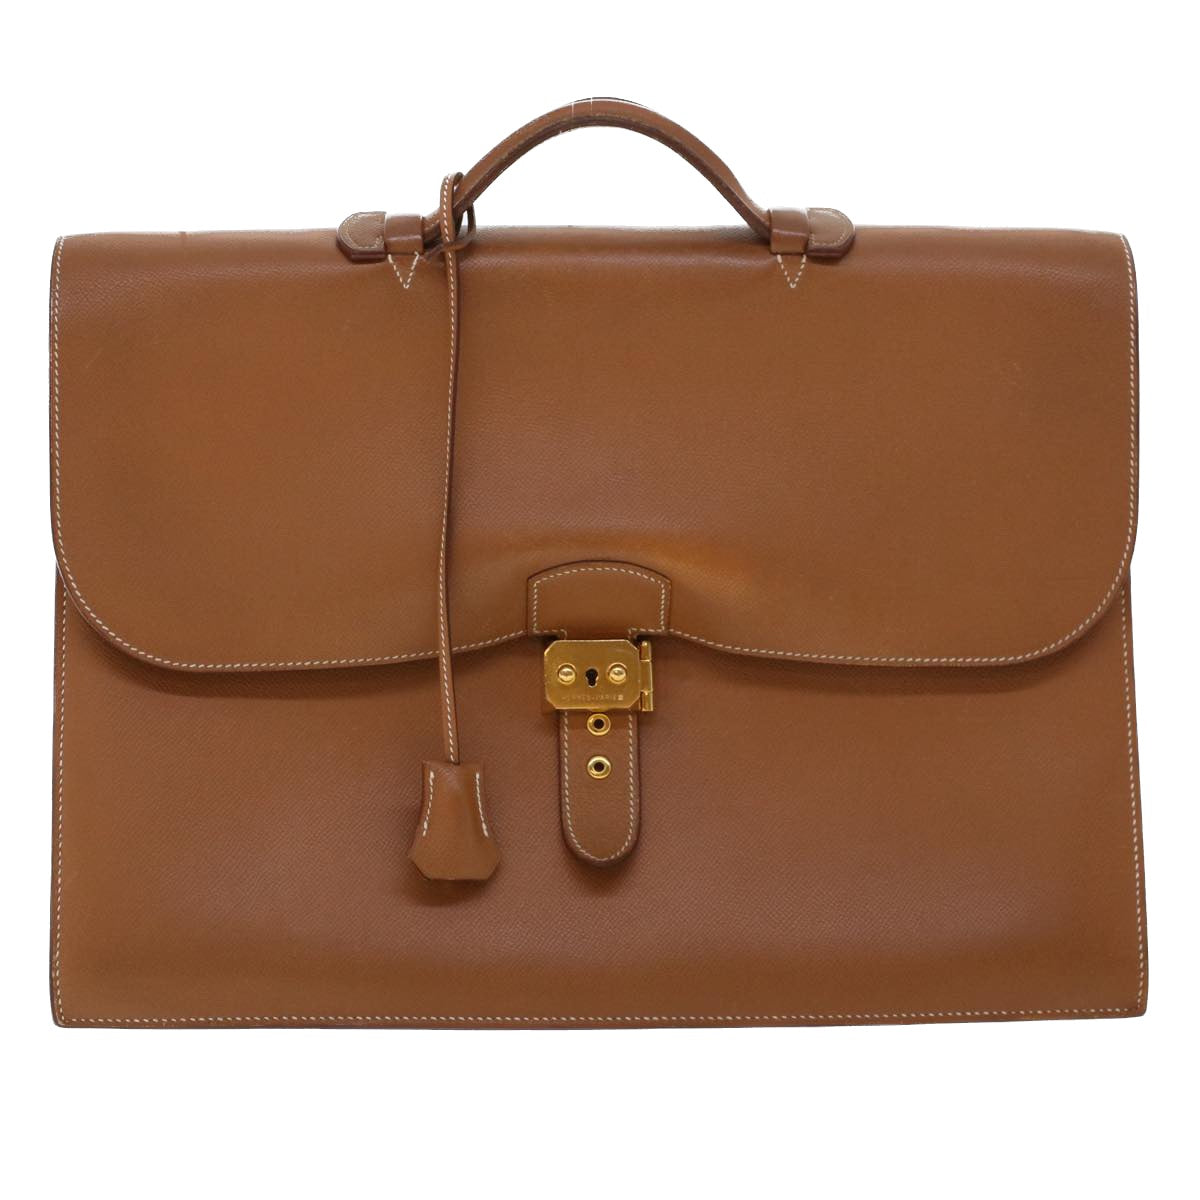 HERMES Sac Adepeche Business Bag Leather Brown Auth am4465